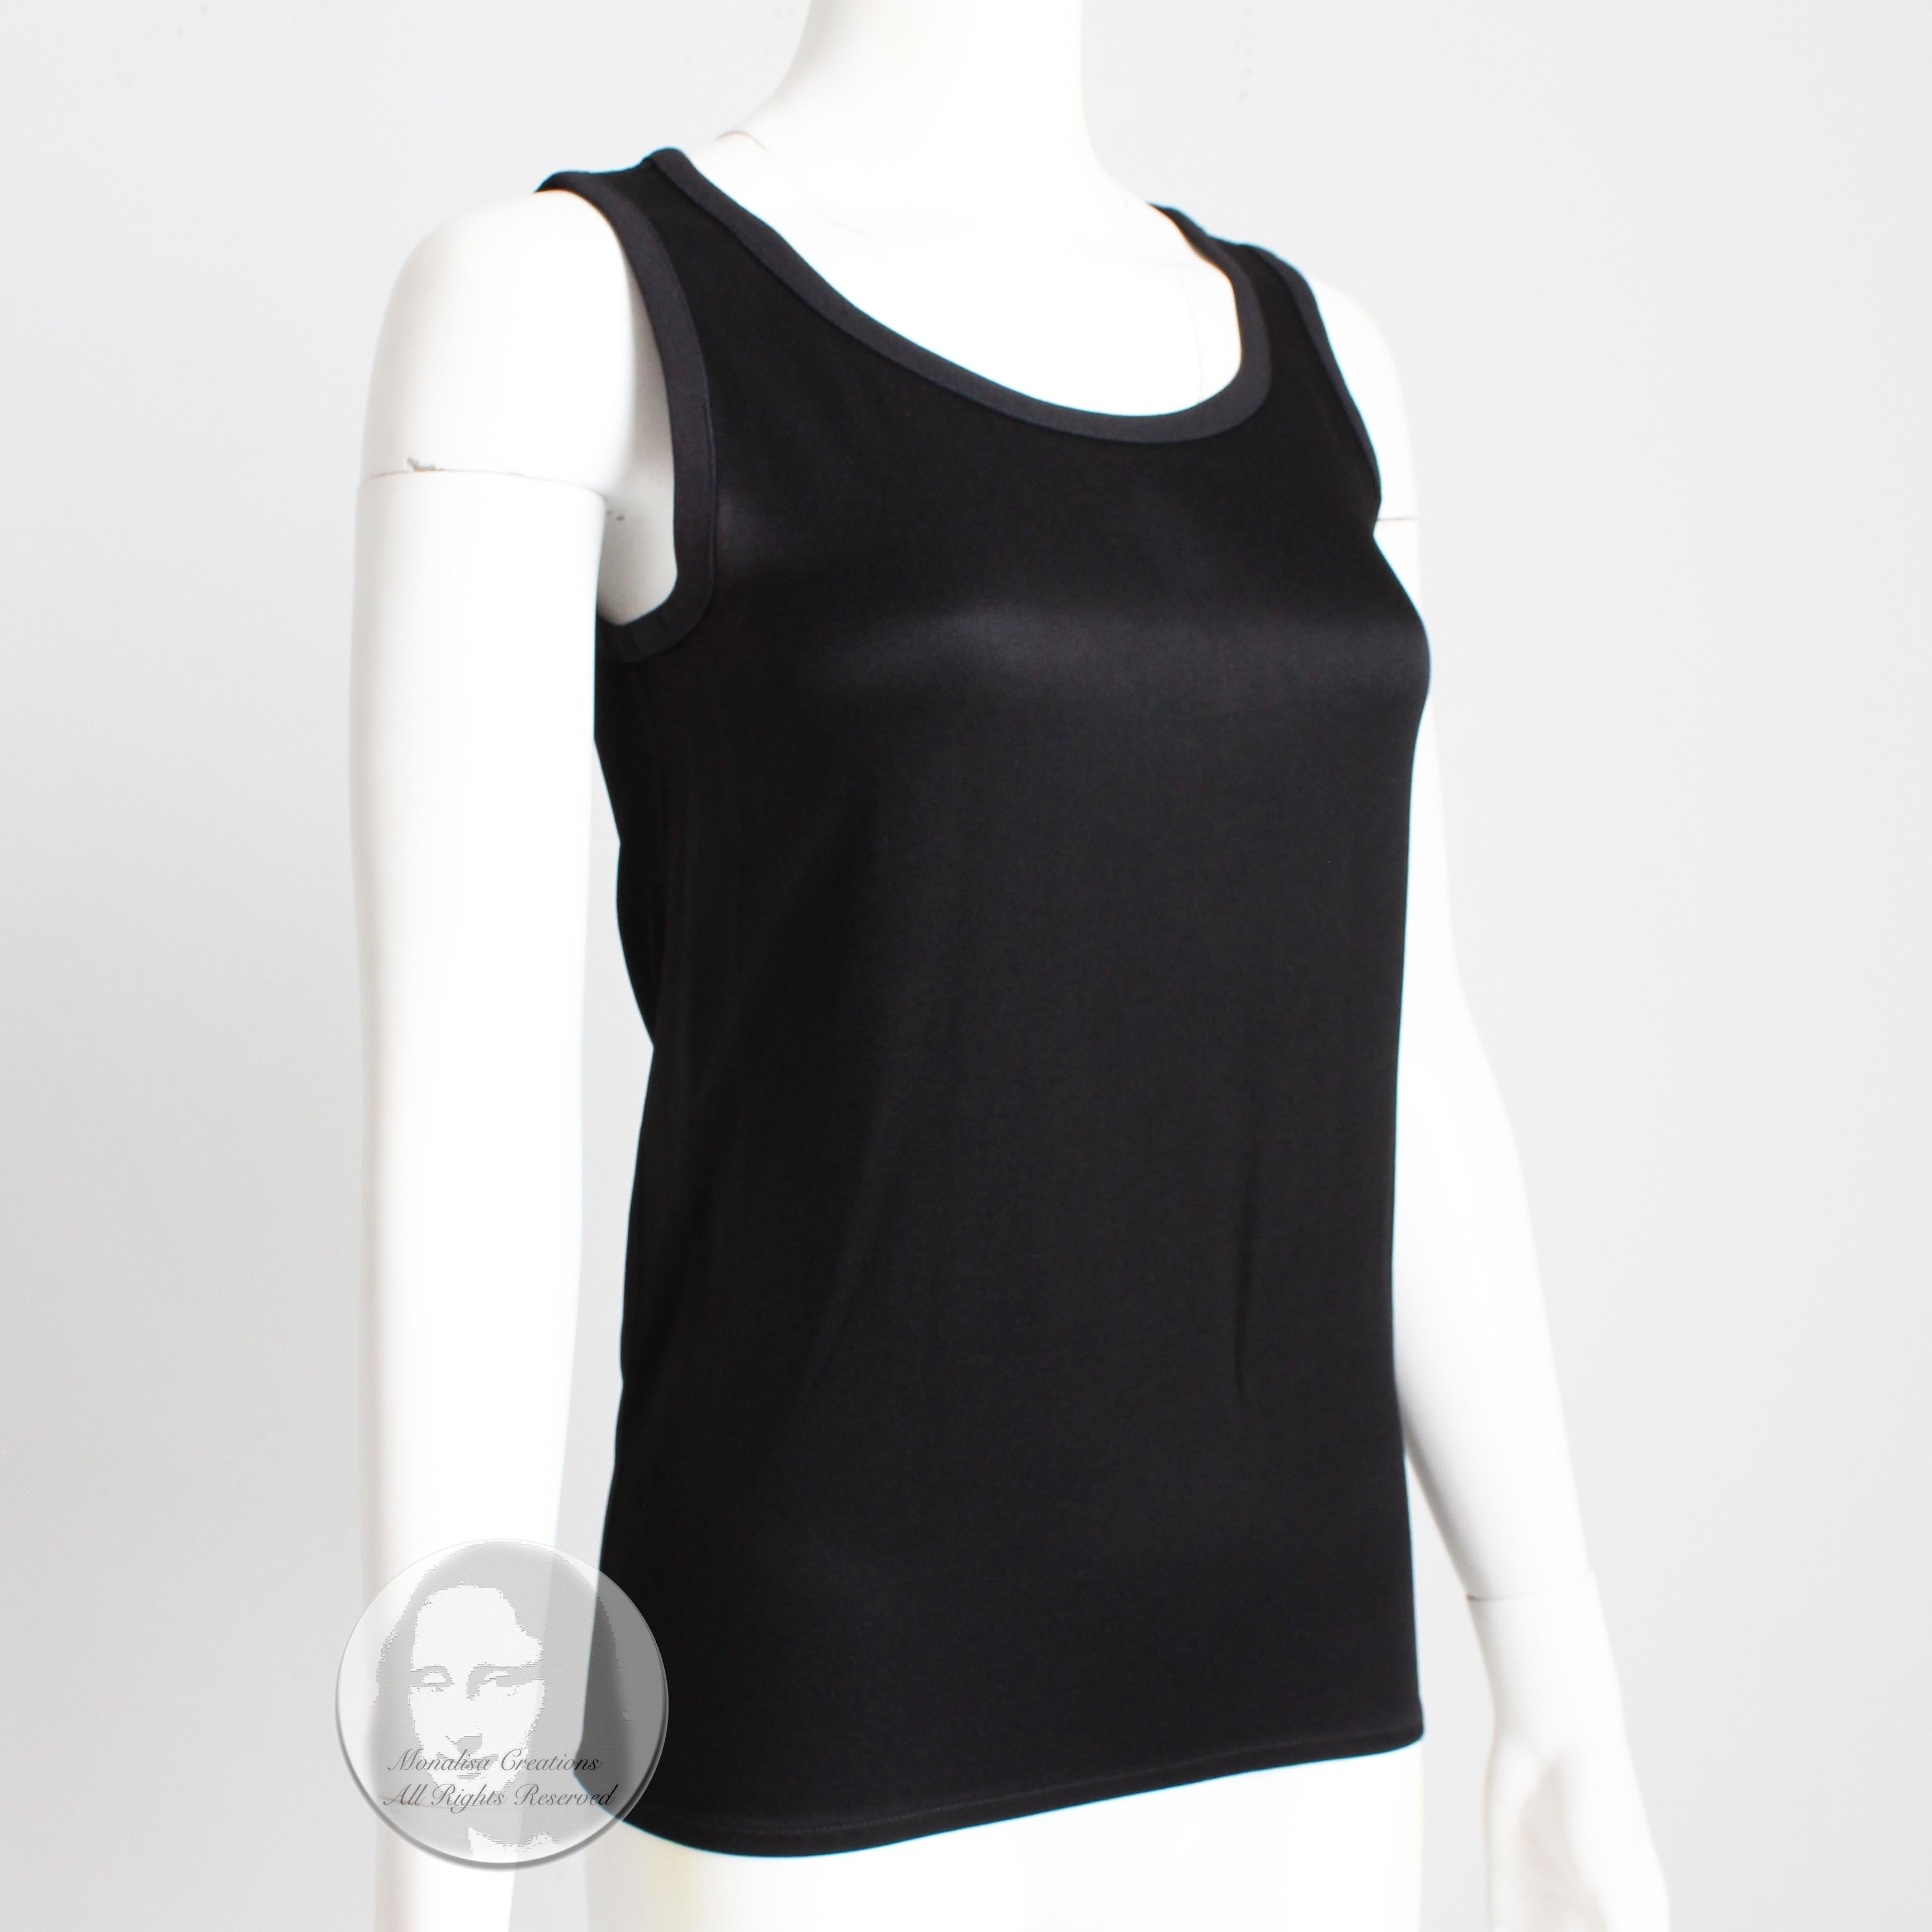 Yves Saint Laurent Black Sleeveless Top Tank Style Satin Vintage 90s Size 34 In Good Condition For Sale In Port Saint Lucie, FL